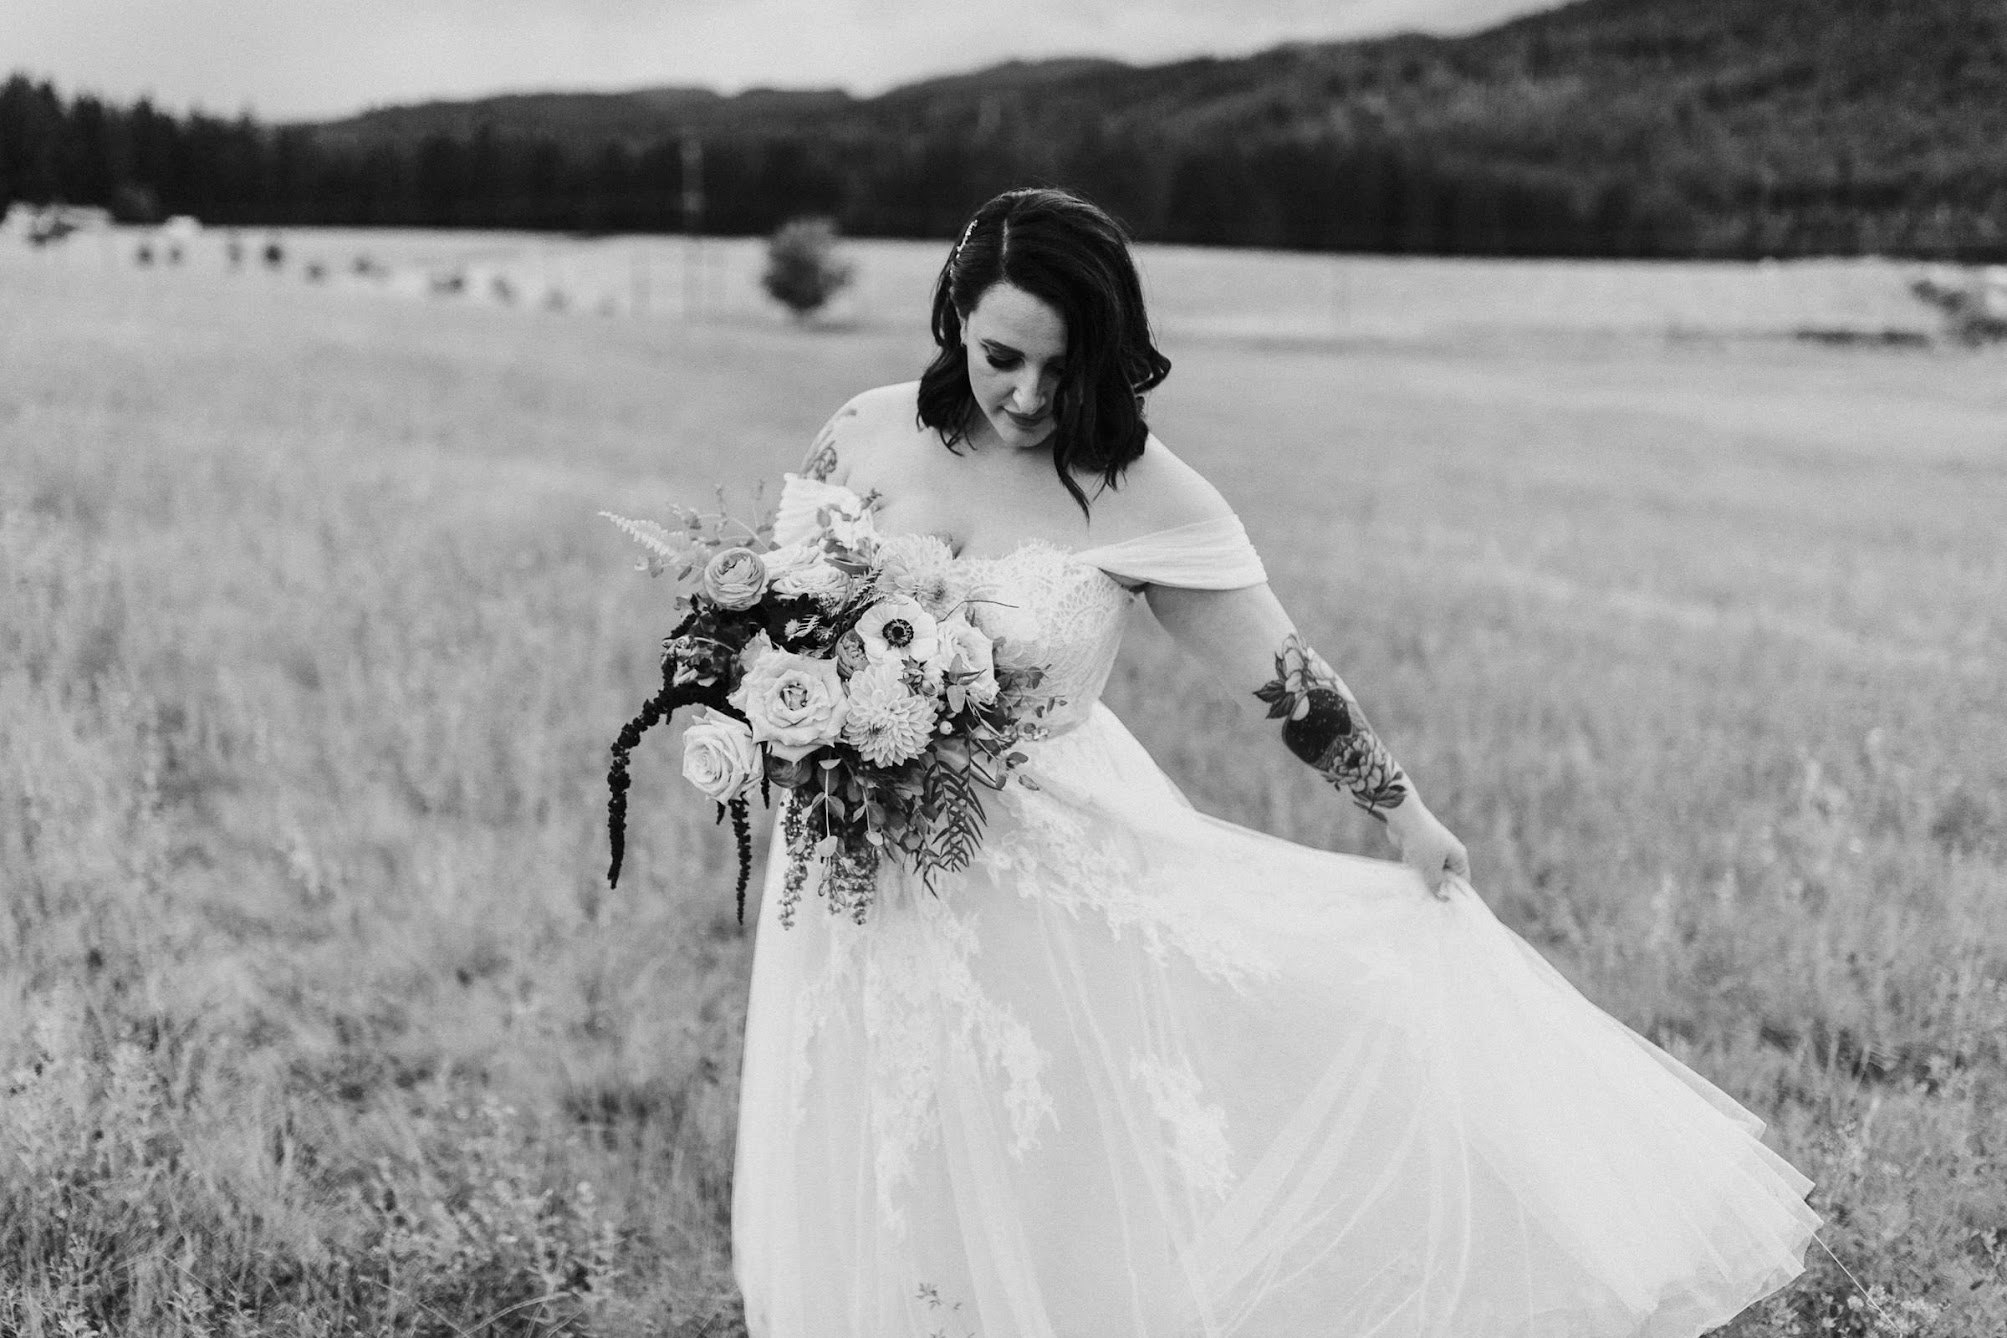 She is holding her wedding dress with one hand and looking at her flowers, it looks like she is dancing. 